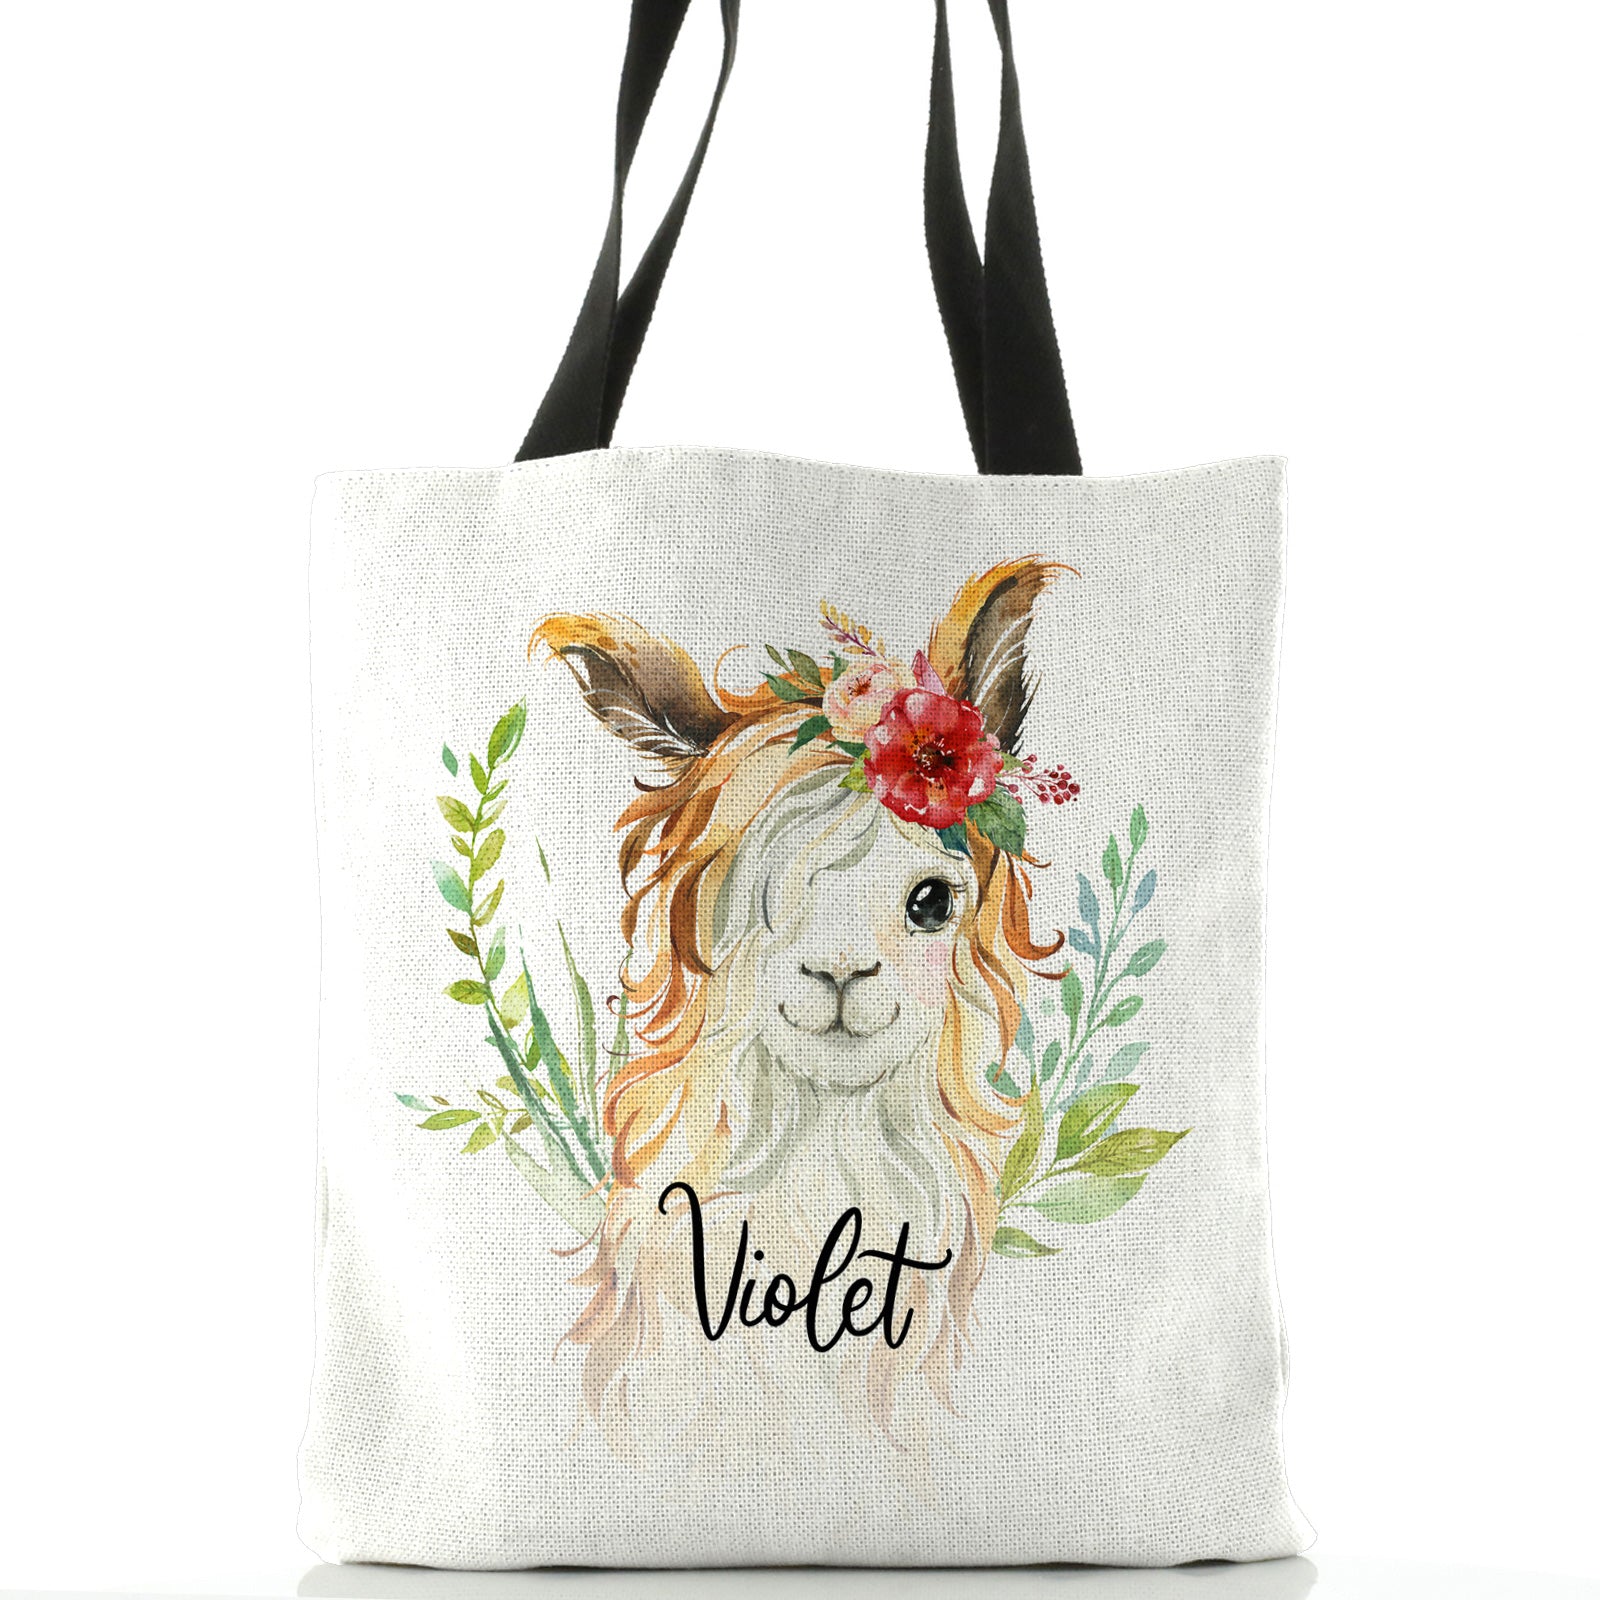 Personalised White Tote Bag with White Goat with Red Flower Hair and Cute Text